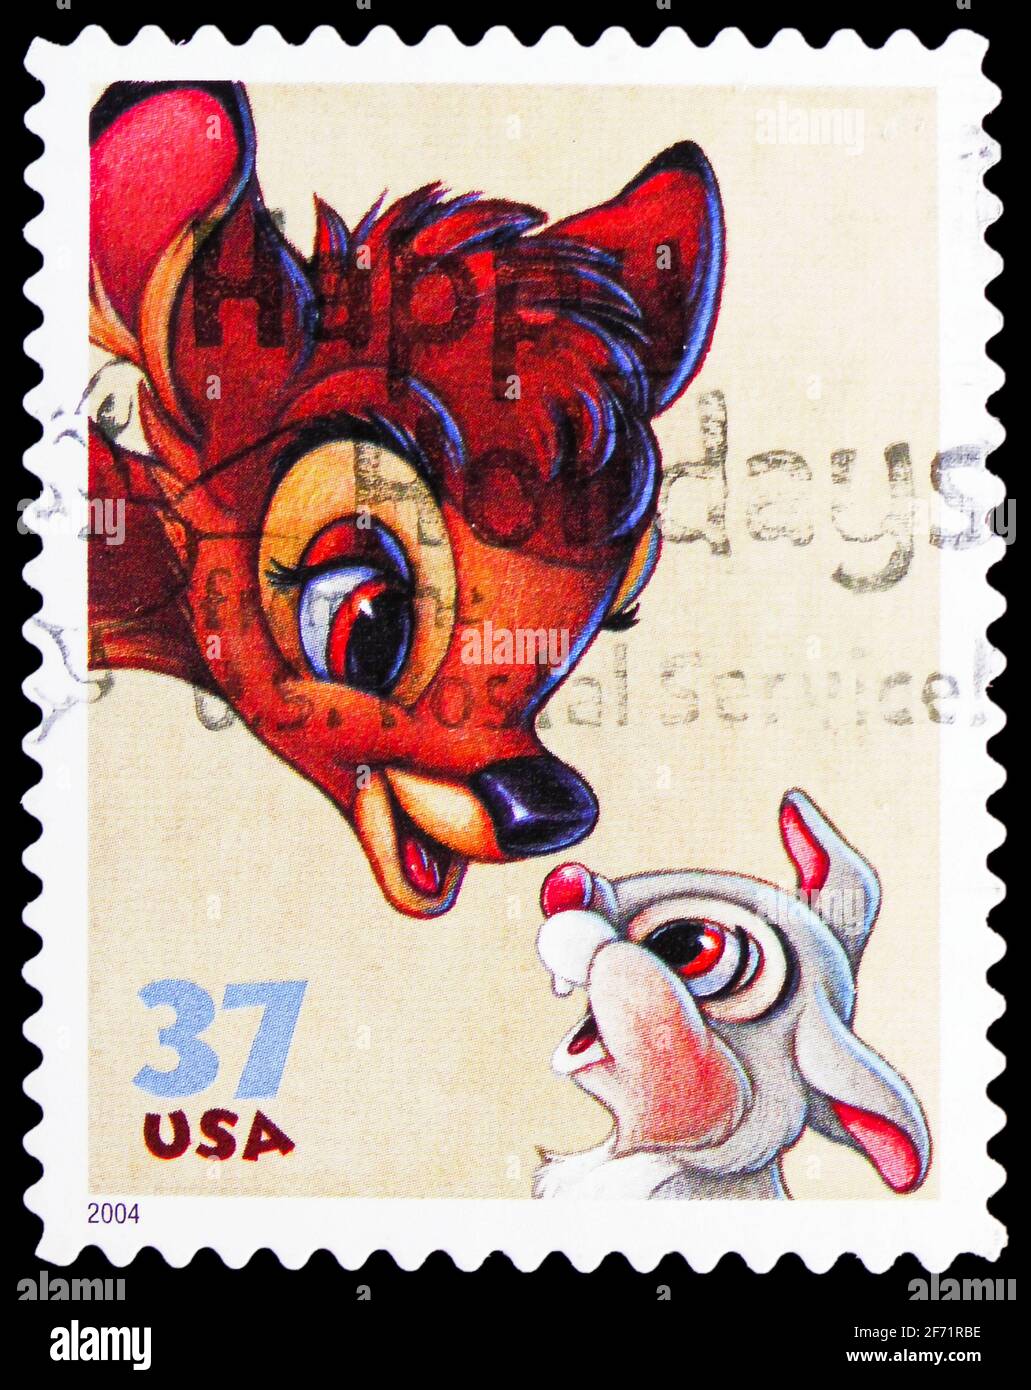 MOSCOW, RUSSIA - JANUARY 20, 2021: Postage stamp printed in United States shows Bambi, Thumper, Walt Disney Characters serie, circa 2004 Stock Photo